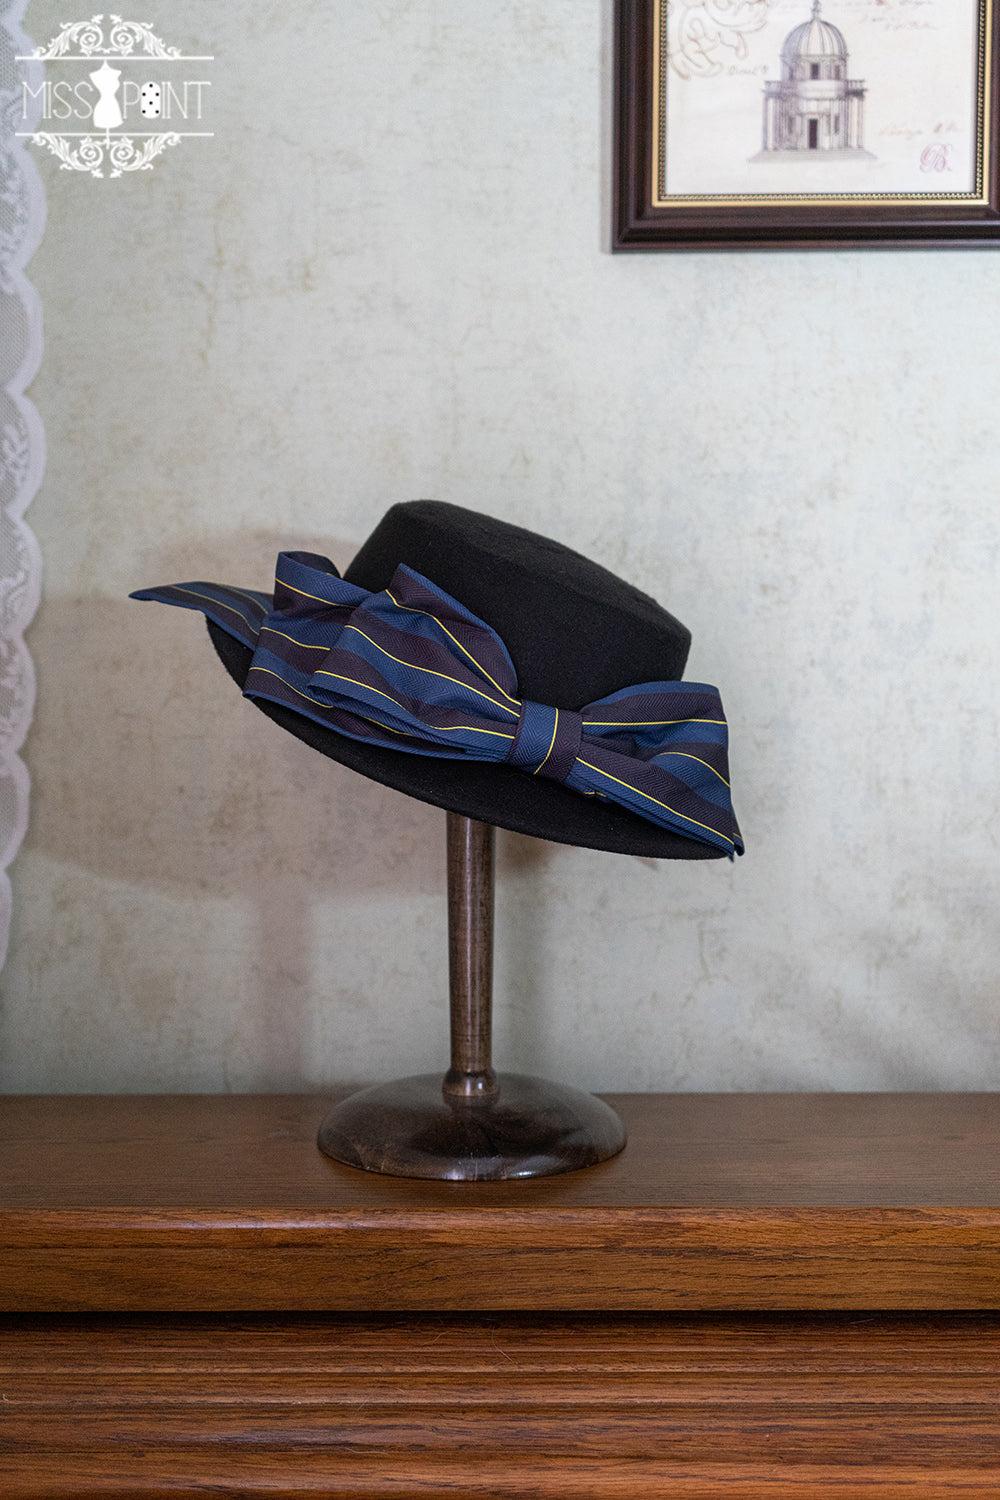 (Buyforme)Miss Point~Stripped Lolita Headband Veil Hat Clip Necklace navy blue stripped top hat  